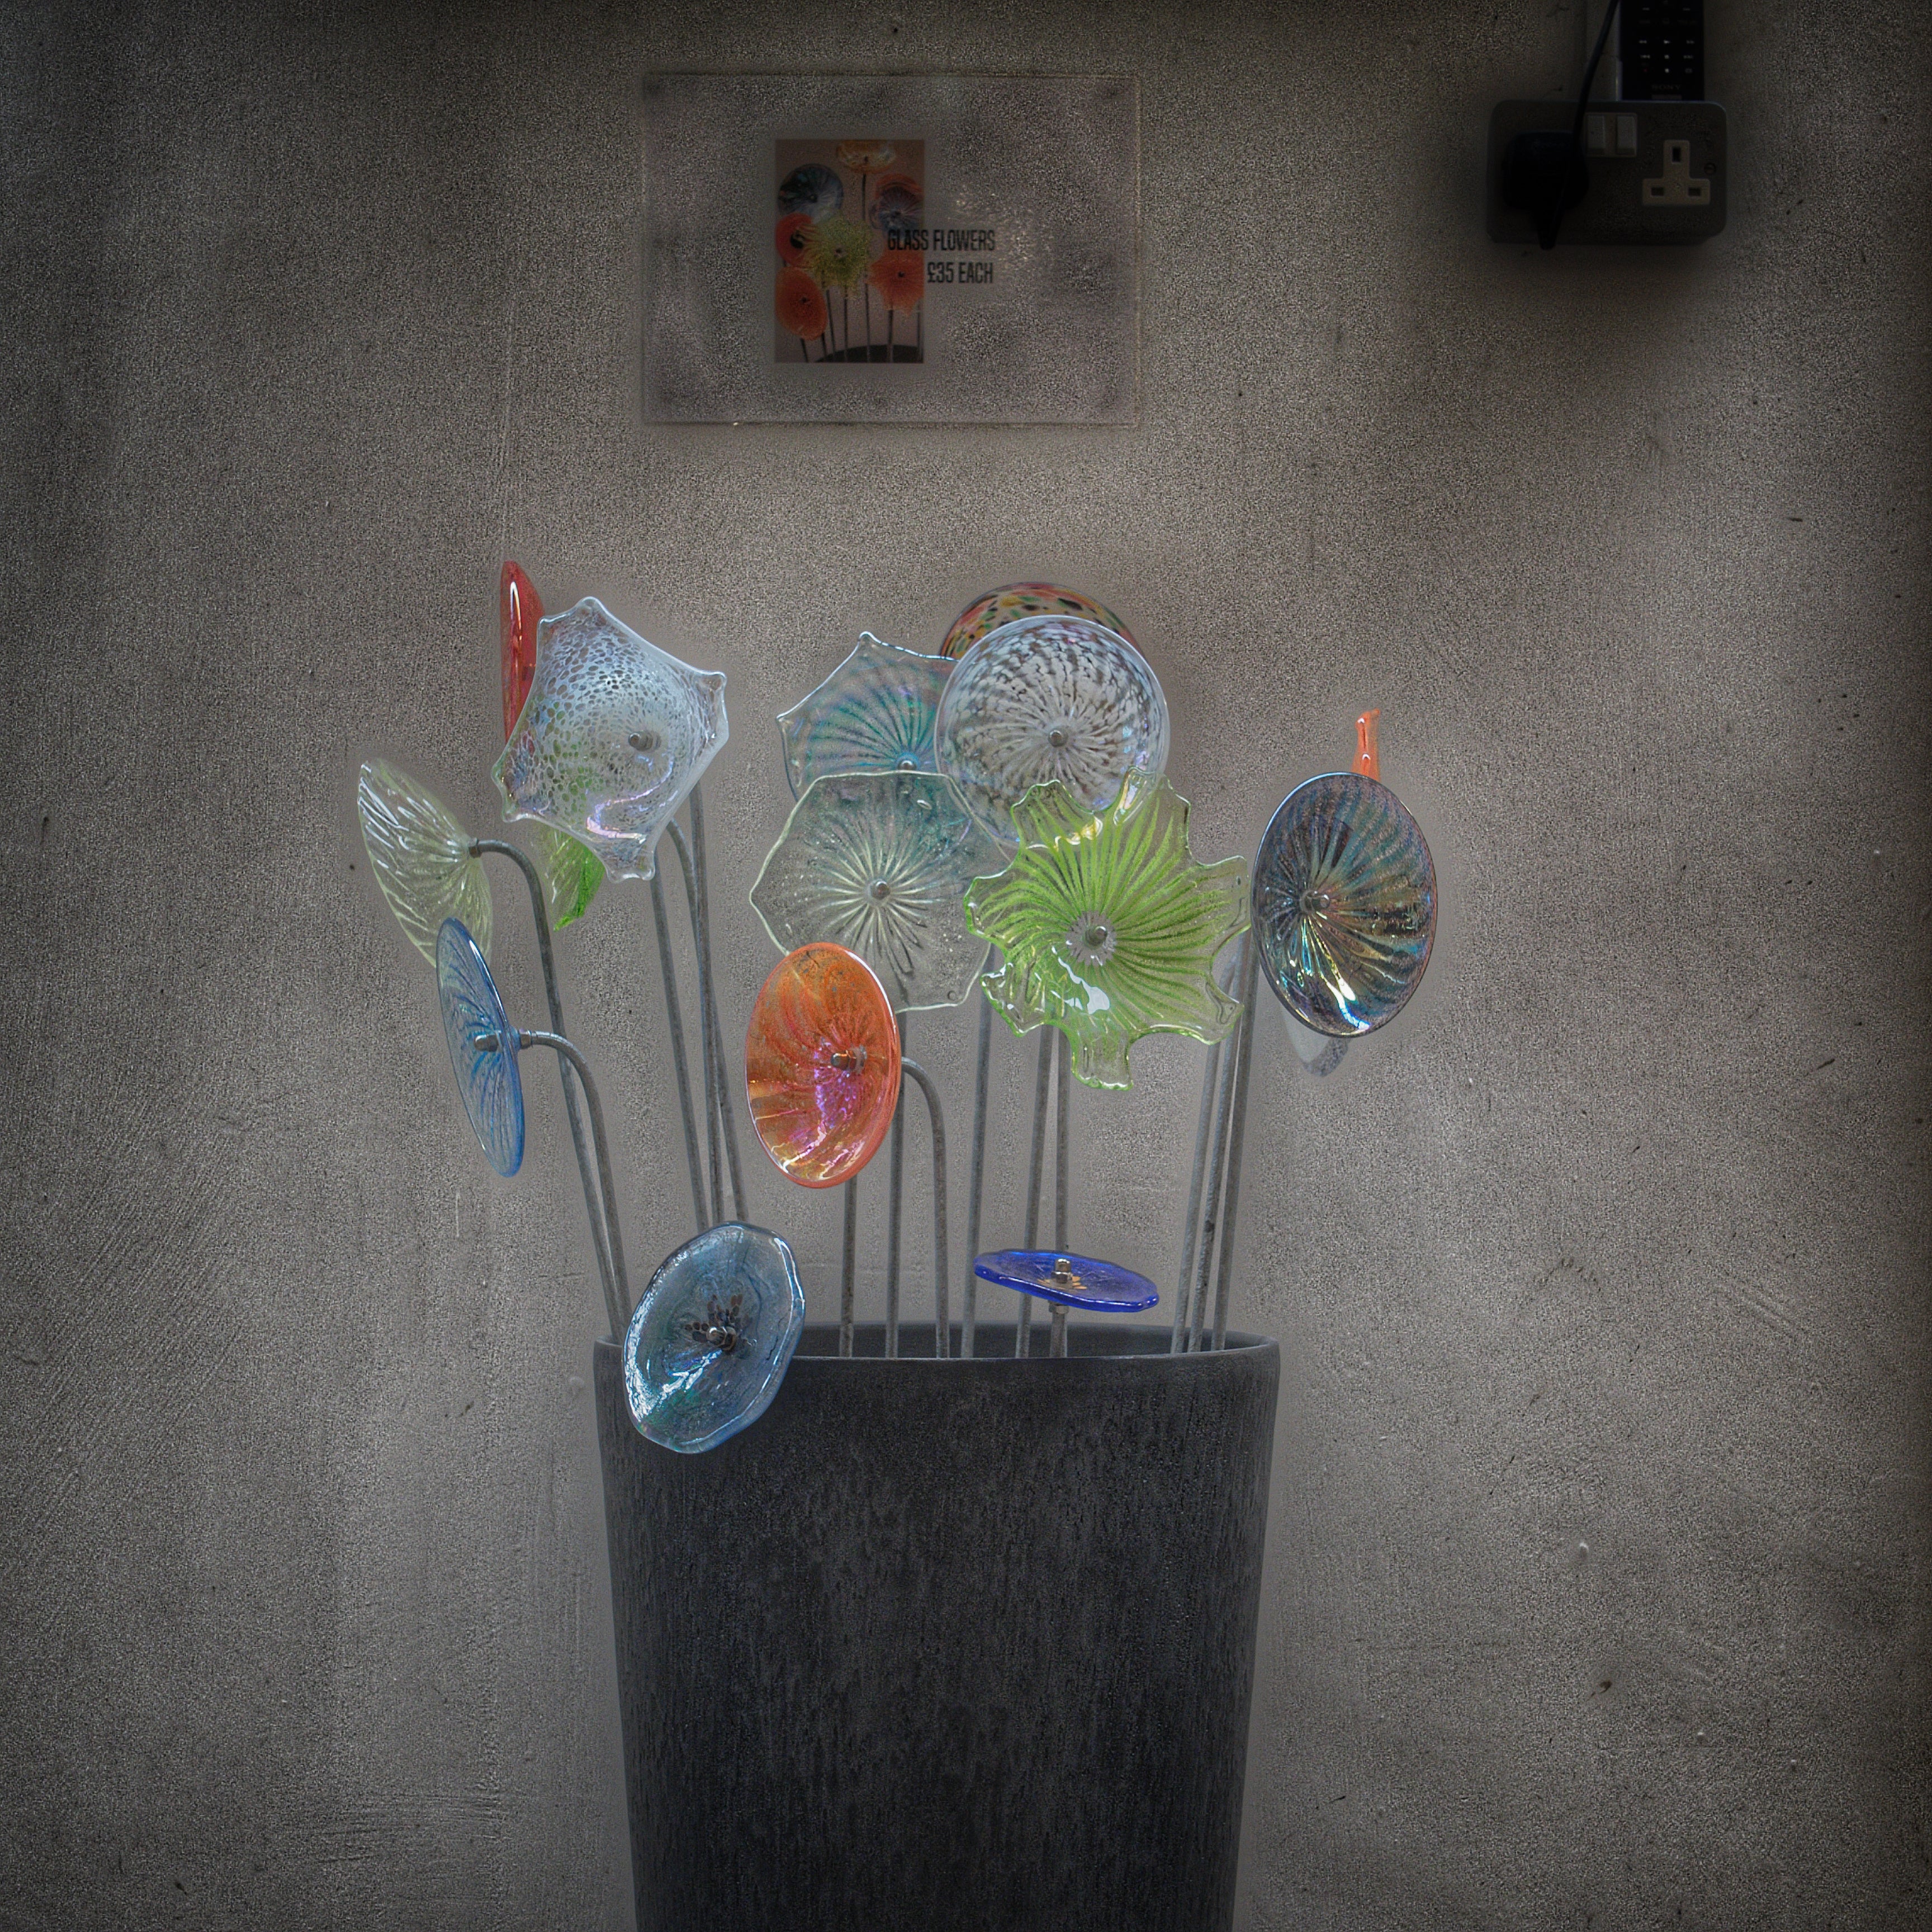 Glass flowers for sale in our gallery shop.